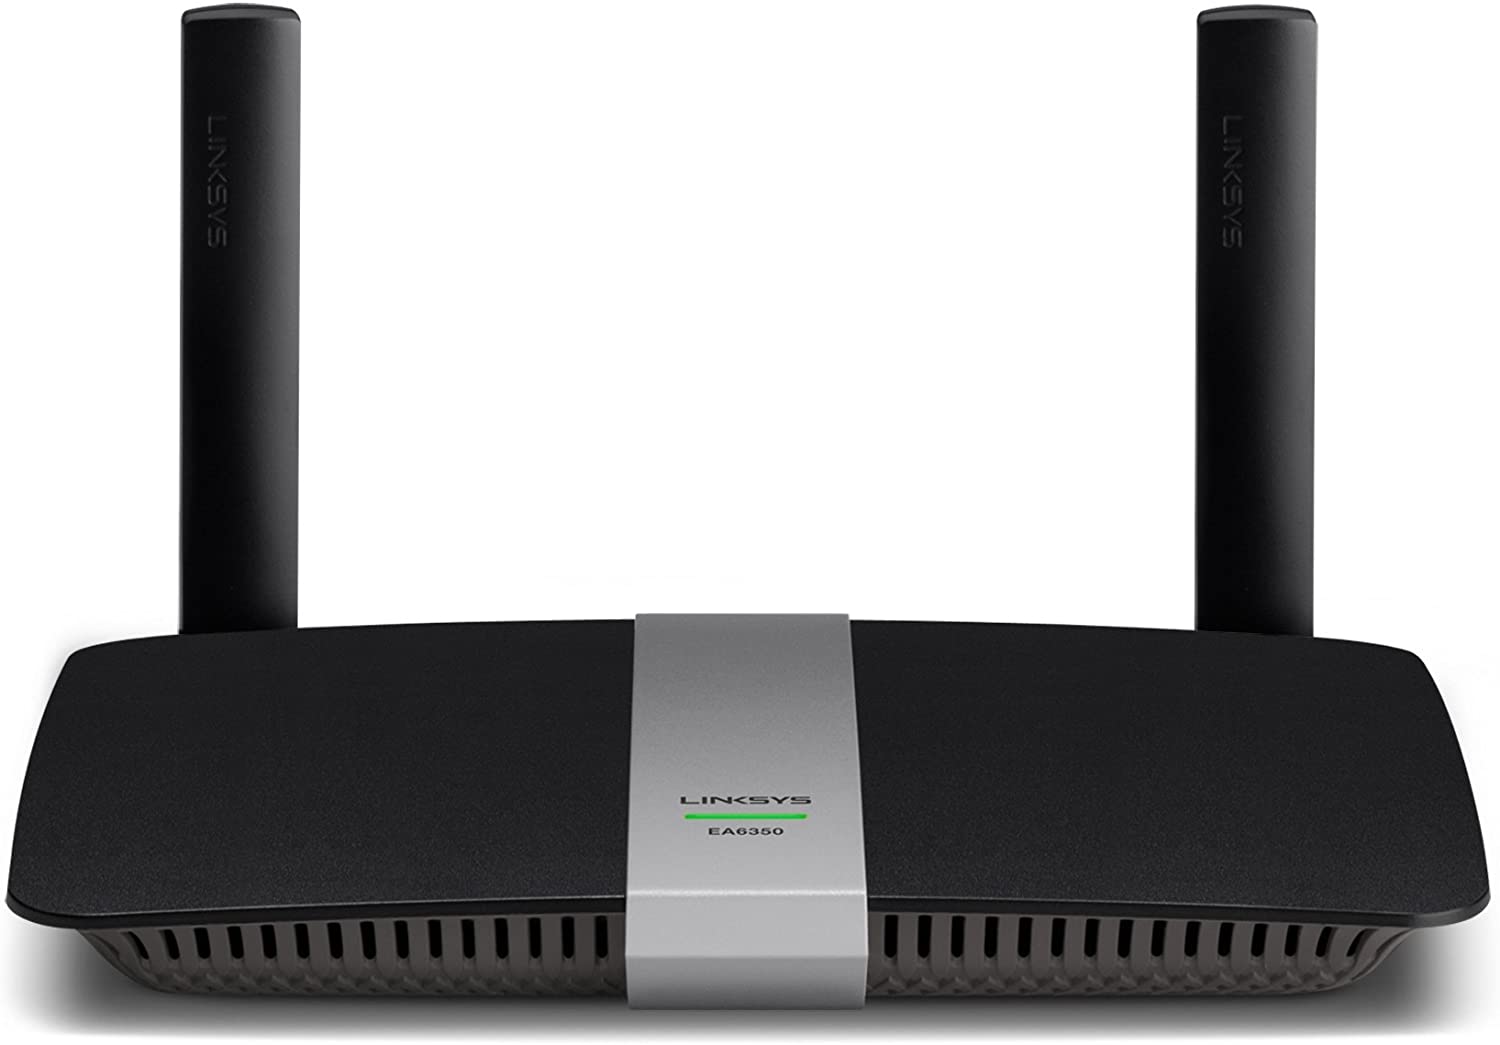 Linksys EA6350 AC1200 Dual-Band Router